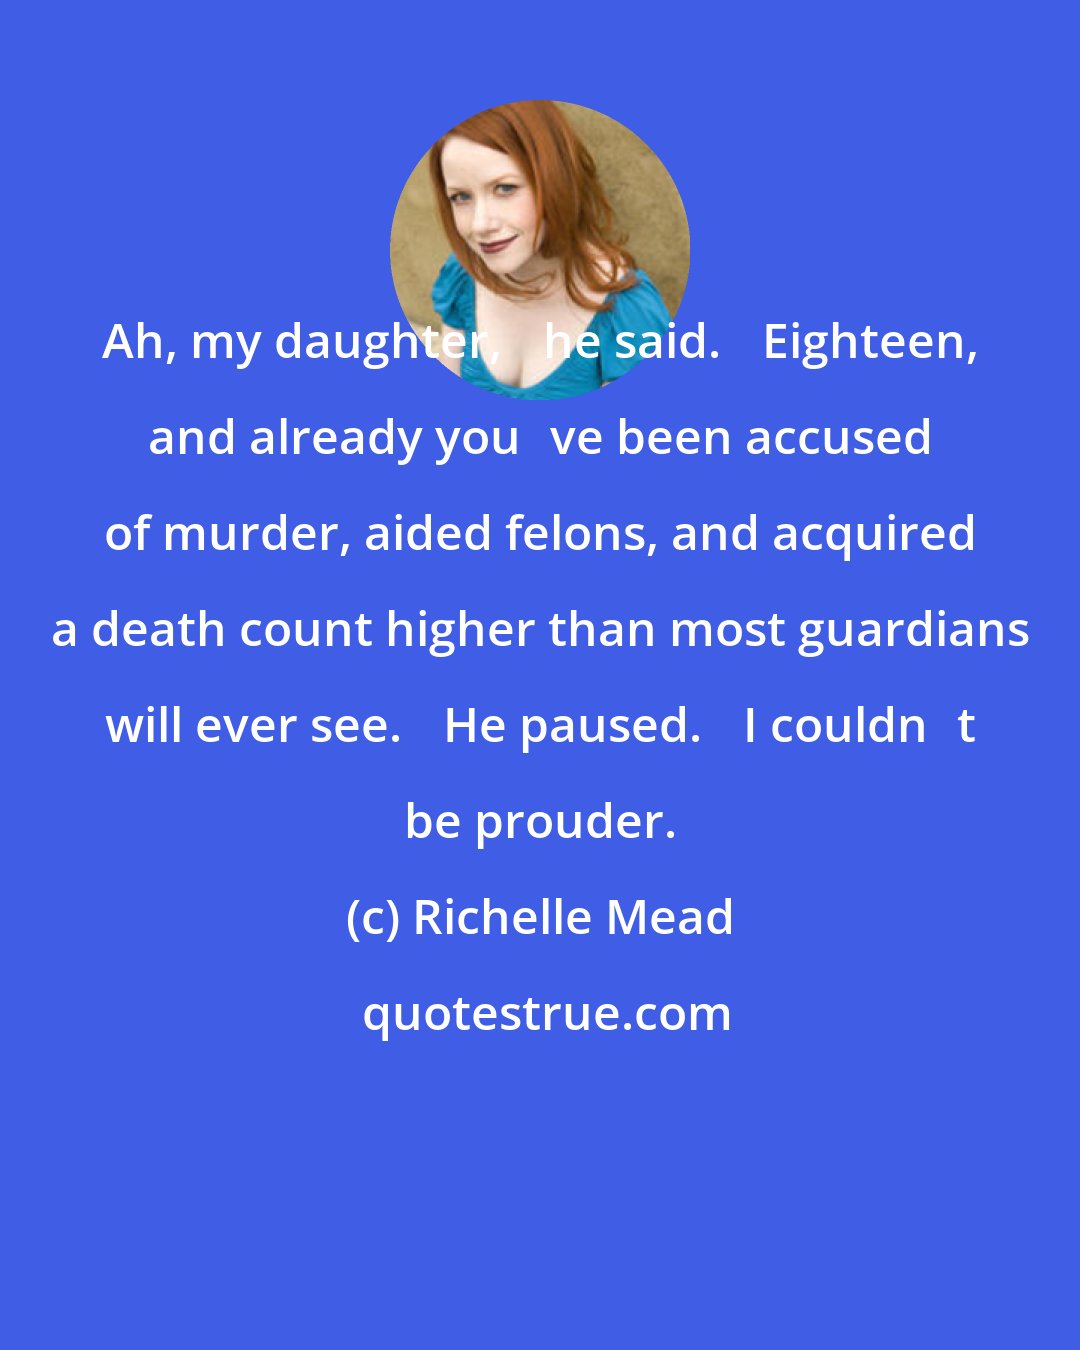 Richelle Mead: Ah, my daughter,ʺ he said. ʺEighteen, and already youʹve been accused of murder, aided felons, and acquired a death count higher than most guardians will ever see.ʺ He paused. ʺI couldnʹt be prouder.